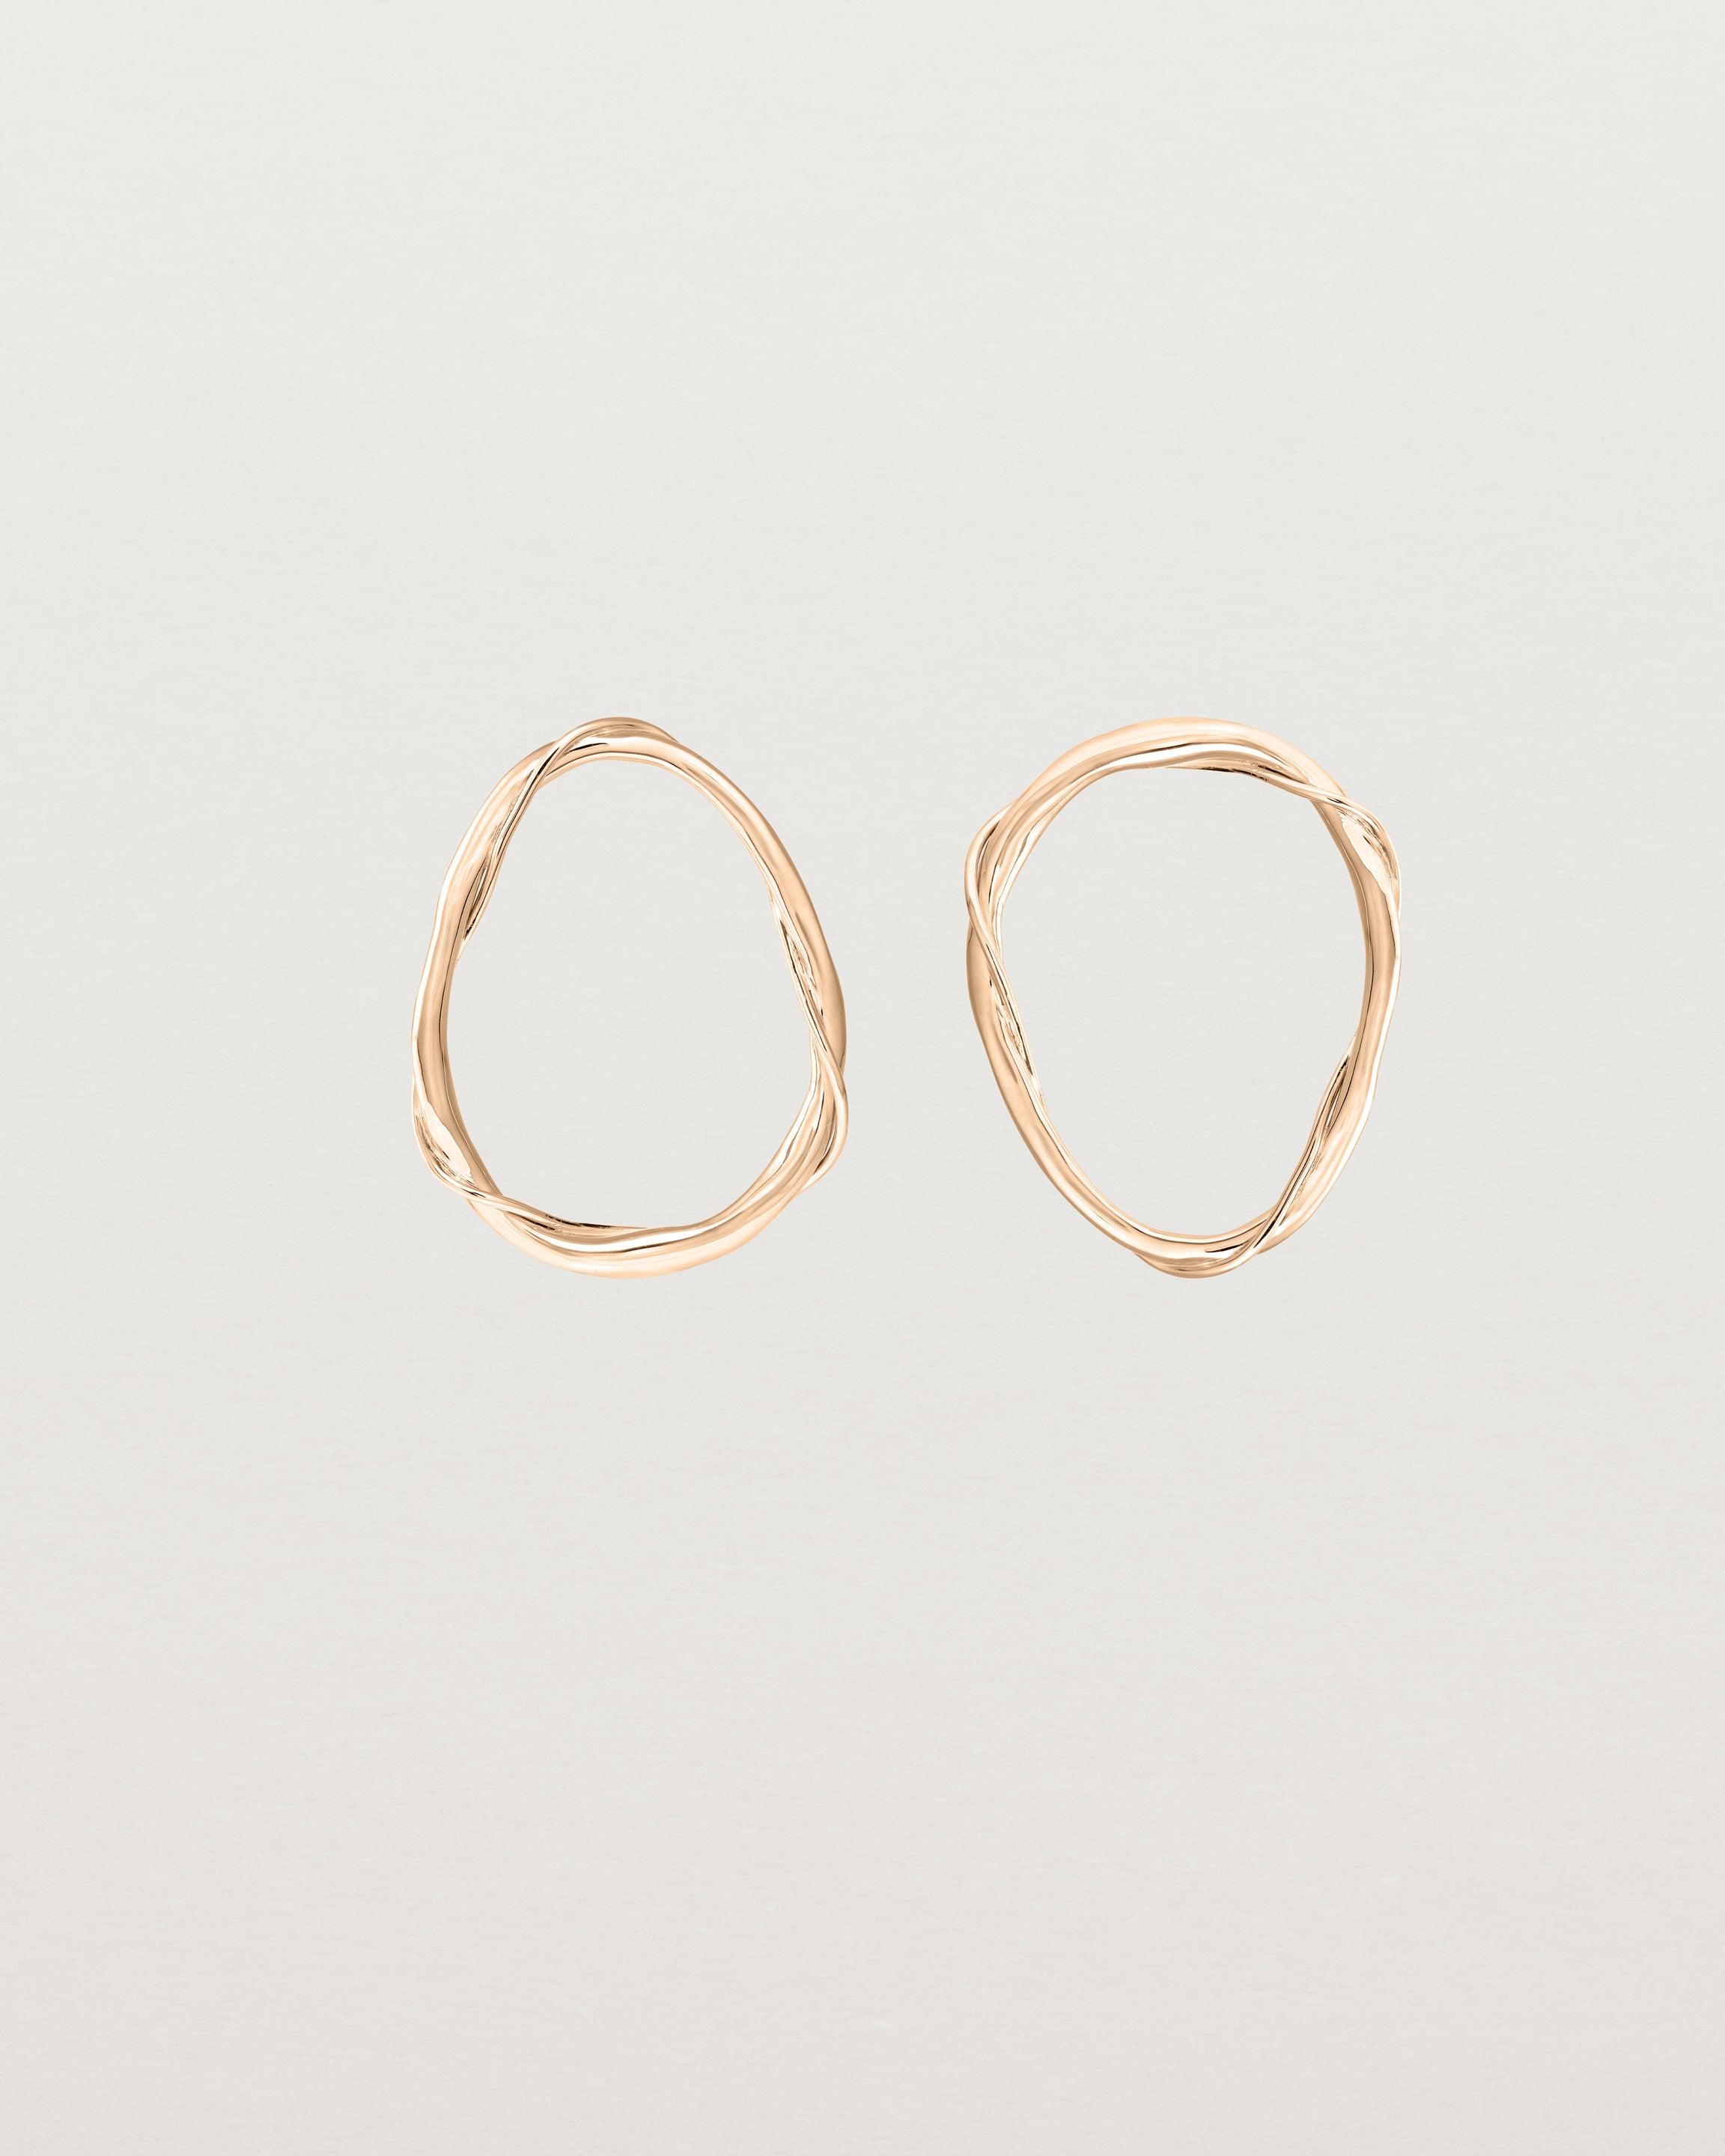 Front view of the Dalí Earrings in rose gold.